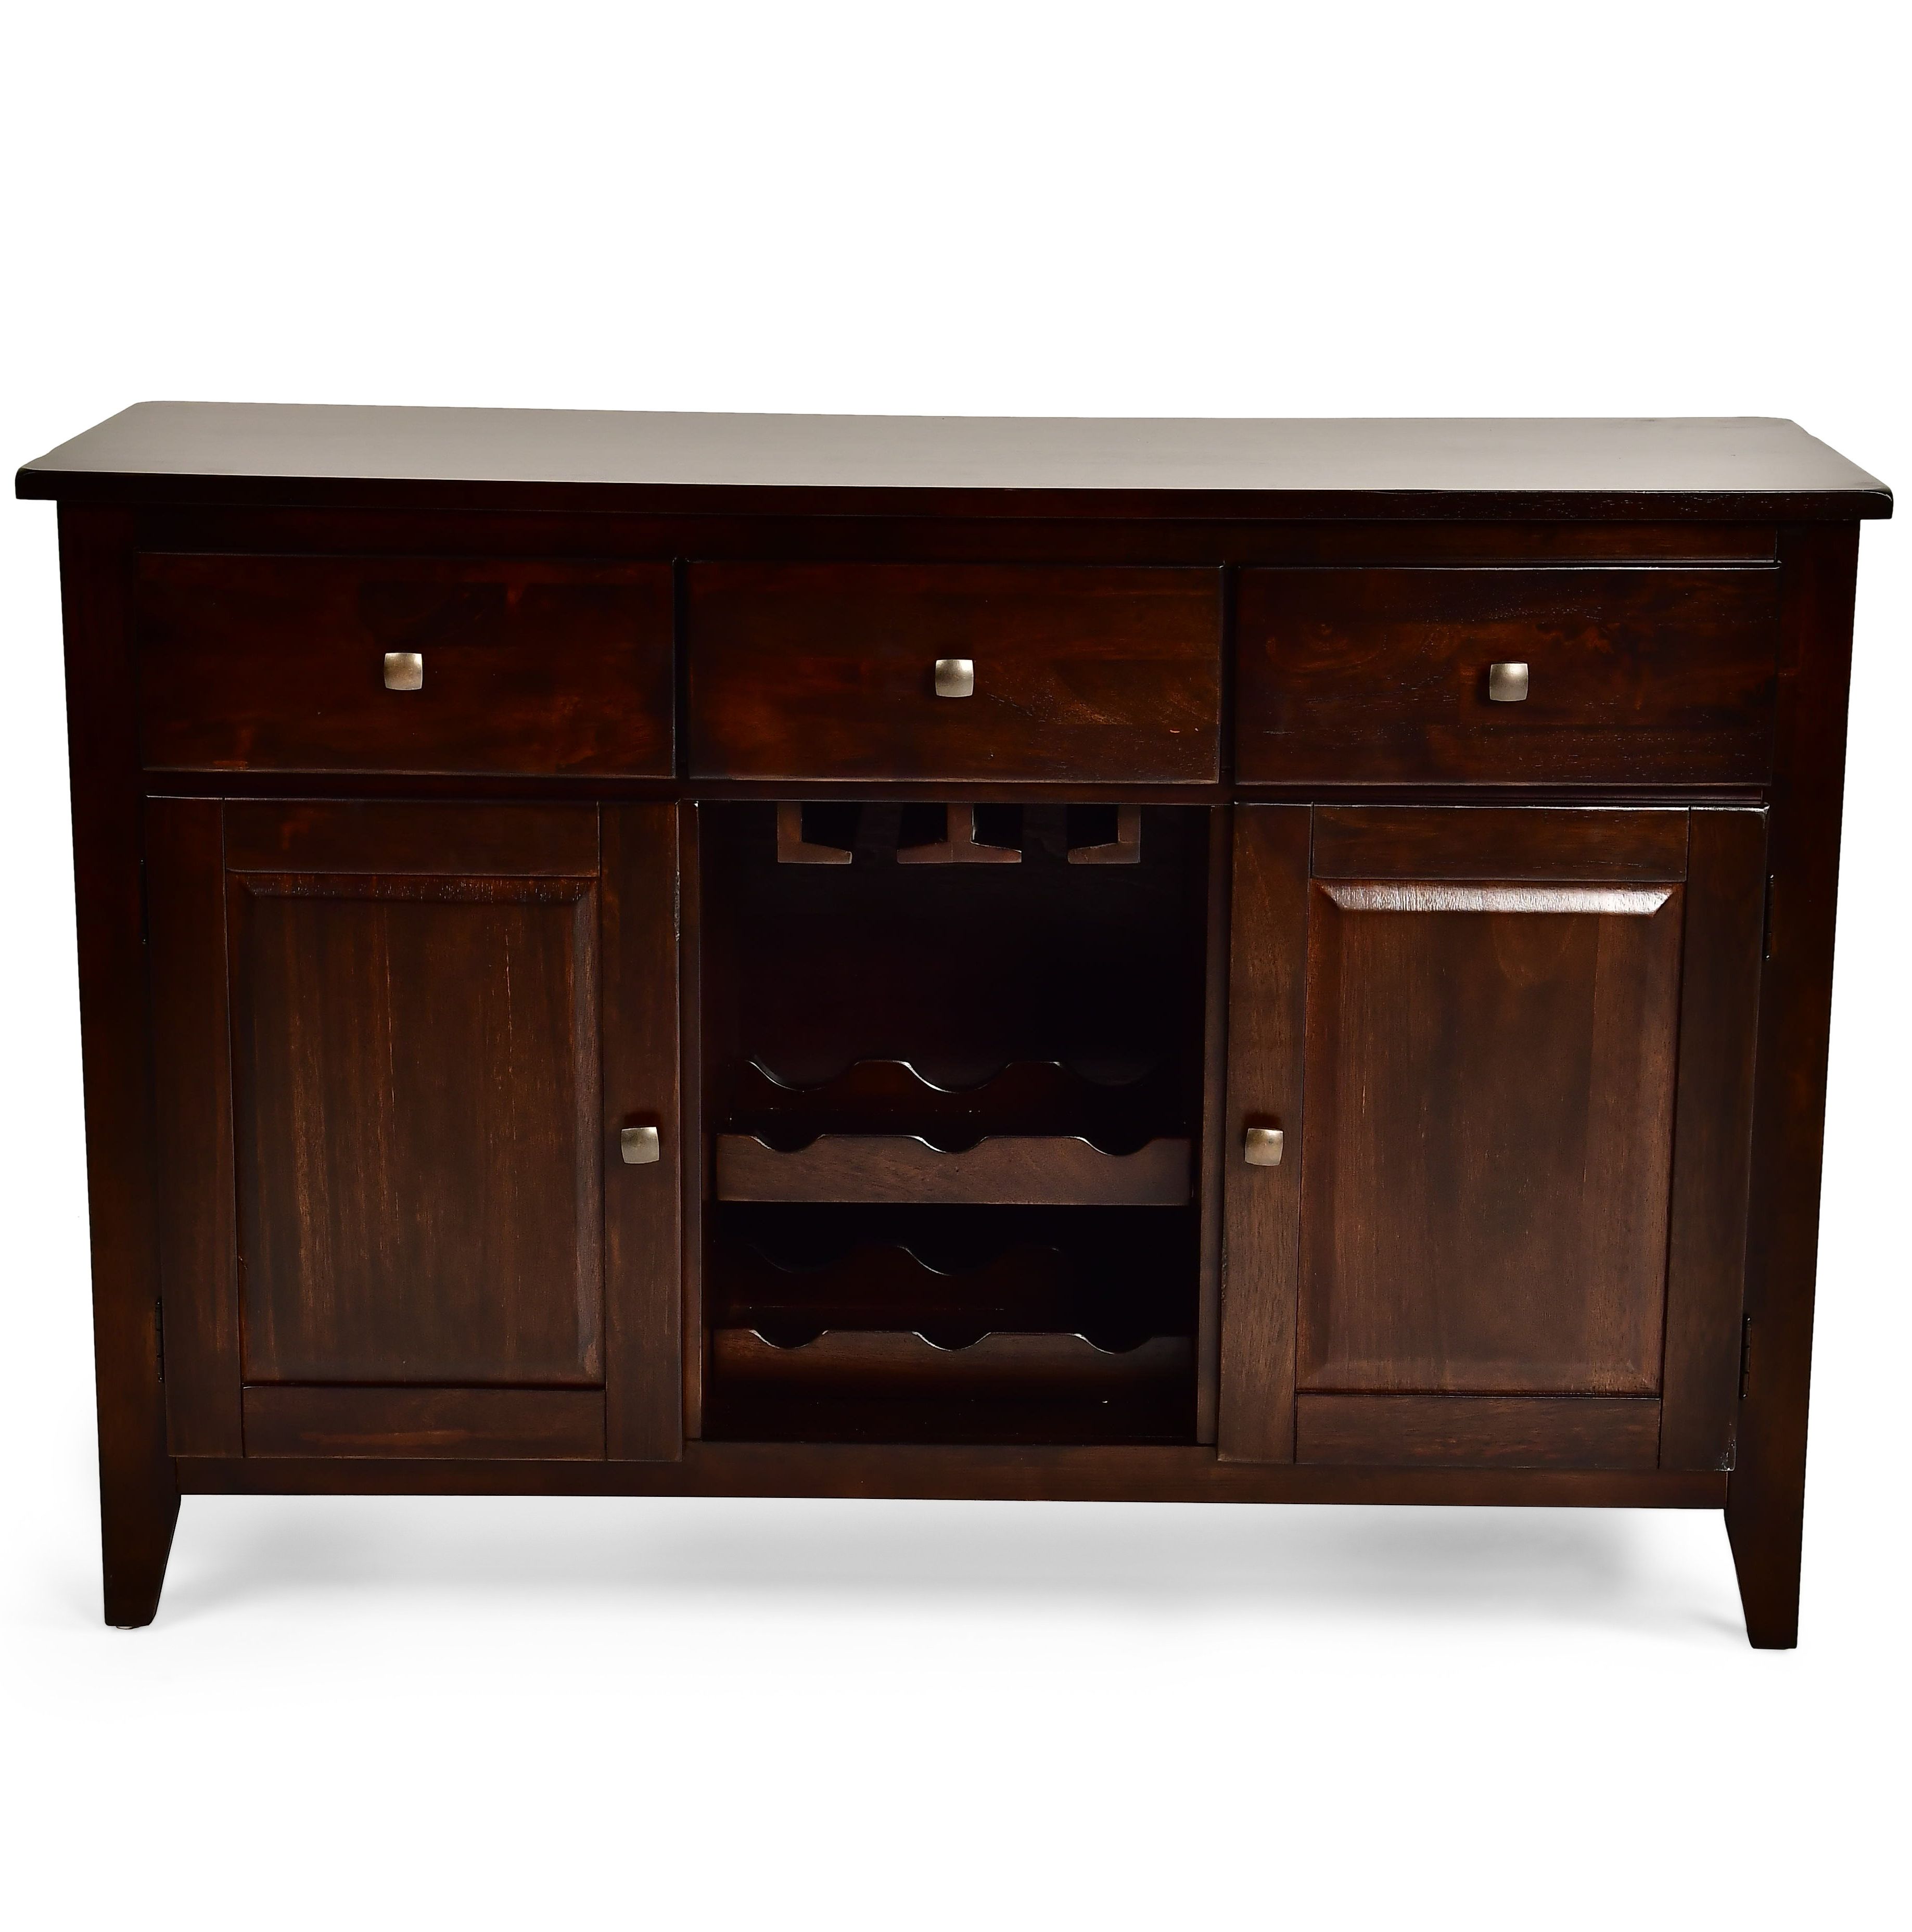 Alcott Hill York Sideboard & Reviews (View 5 of 20)